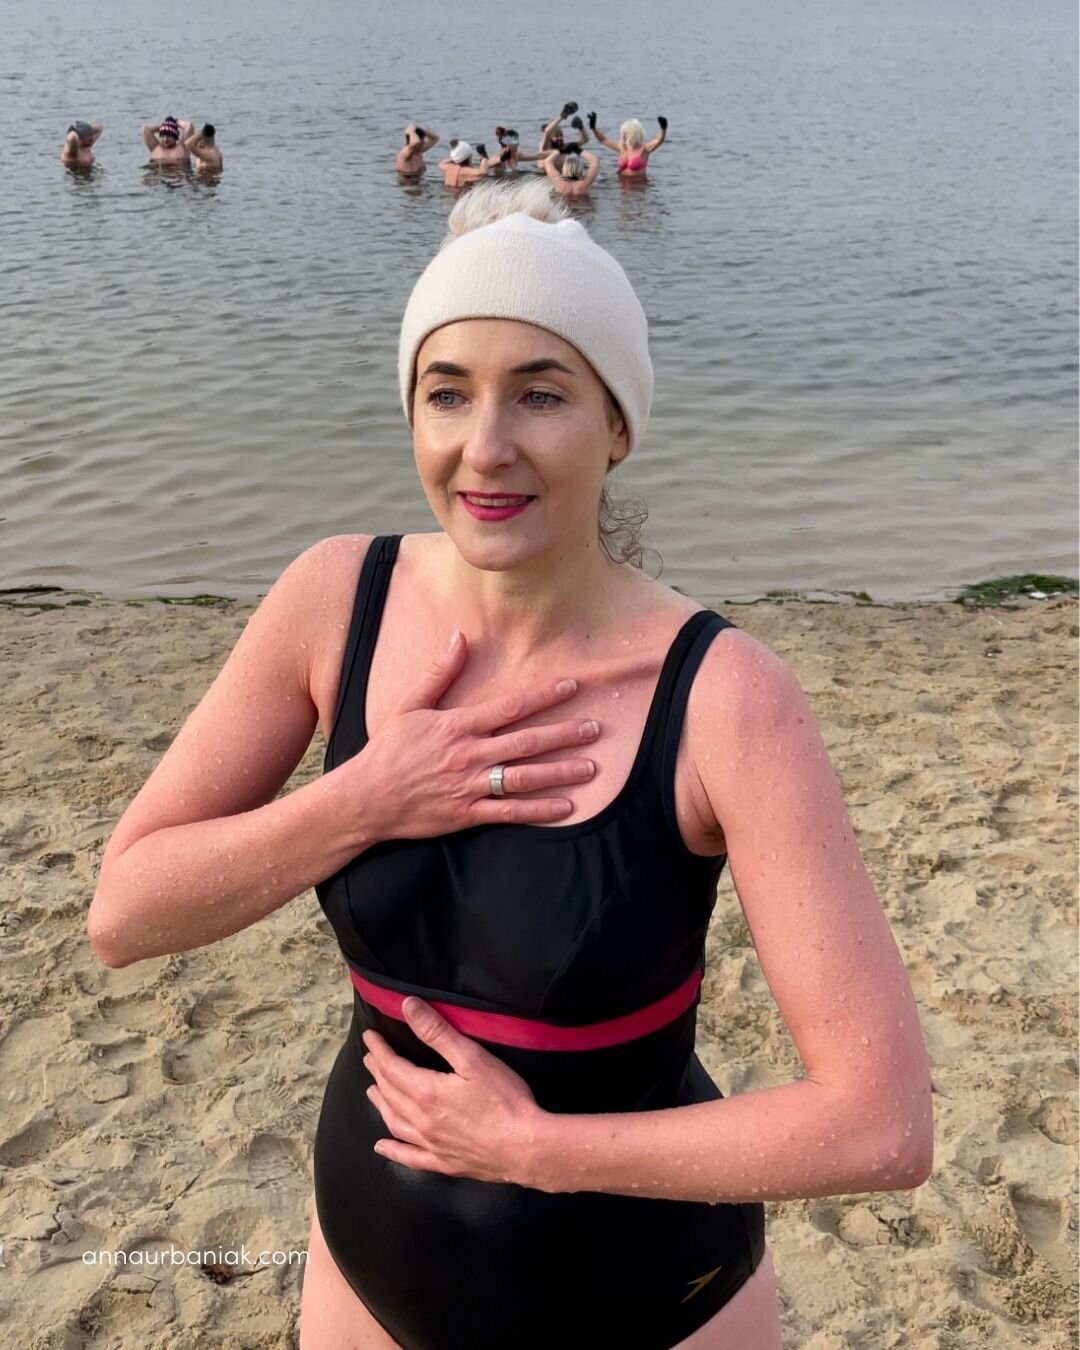 I only had one expectation when I plunged myself into the ice-cold lake in Poland ➡️ that I&rsquo;d be freezing cold! 🥶

I wasn&rsquo;t prepared for the idea that came to me while I was in the frigid lake waters&hellip;

I got the idea that the futu